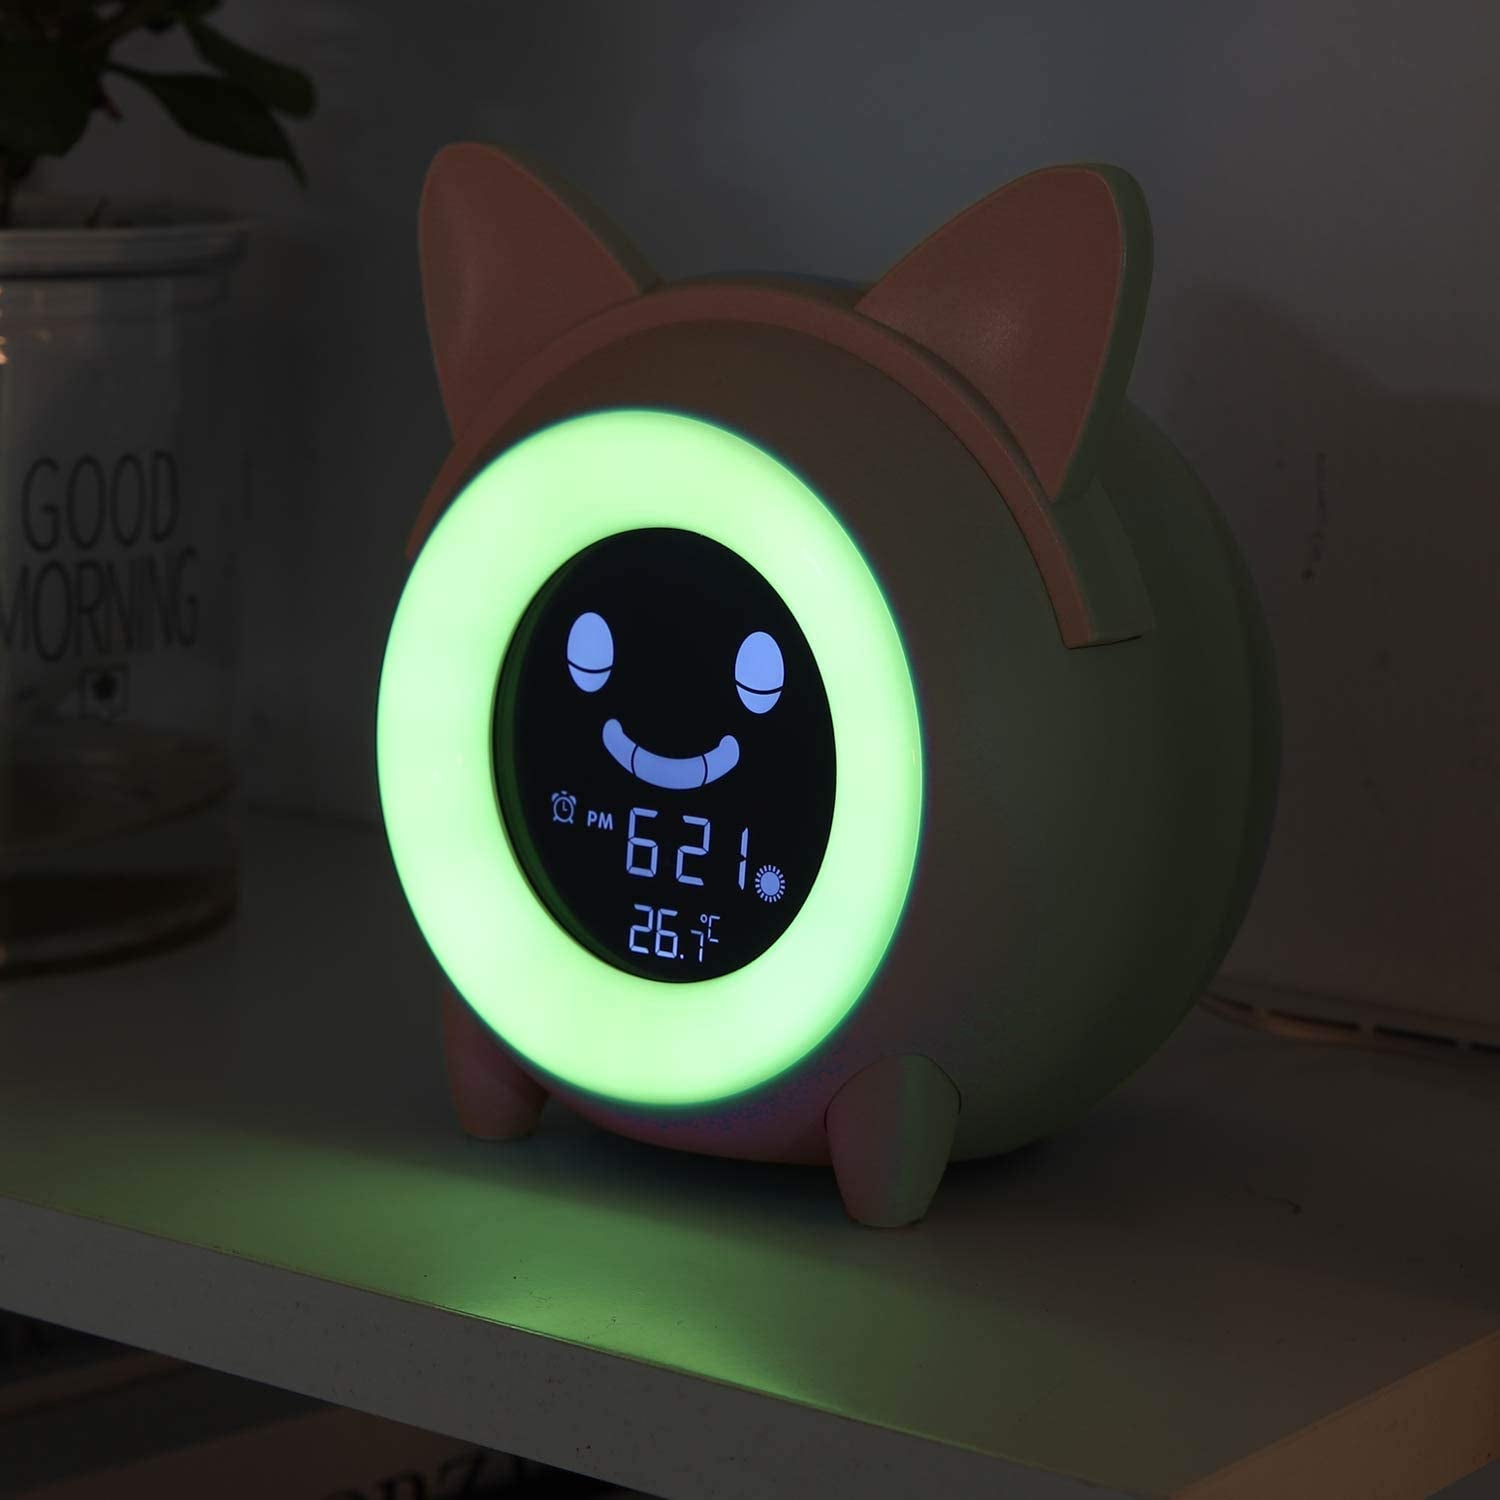 Kids Alarm Clock, Children'S Sleep Trainer, OK to Wake Clock for Bedroom Cute Digital Clock with Temperature, 5 Colors Smart Night Light Clock Teaching Boys Girls When to Wake up (Pink)